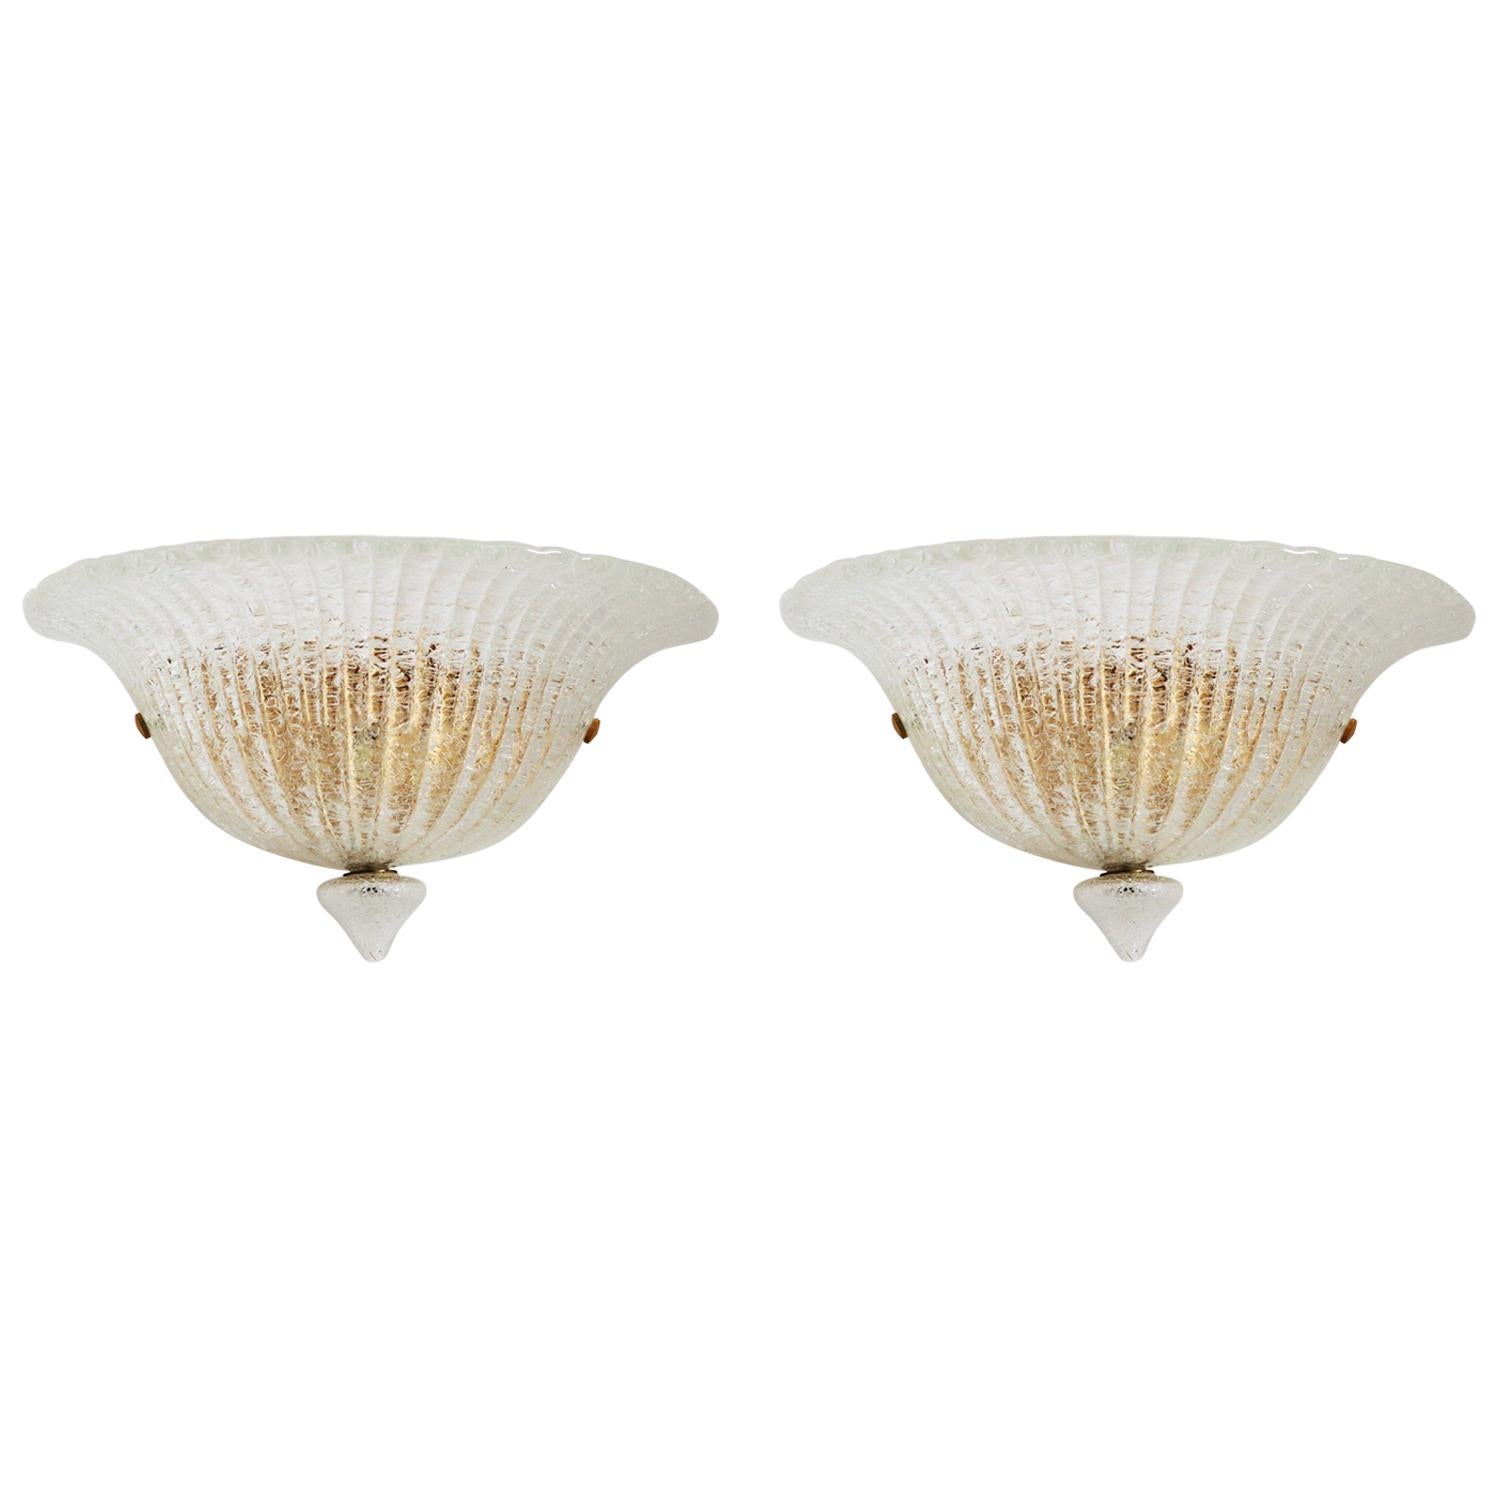 Pair of Italian Midcentury Murano Ice Glass Wall Sconces in Bavovier Style 1970s For Sale